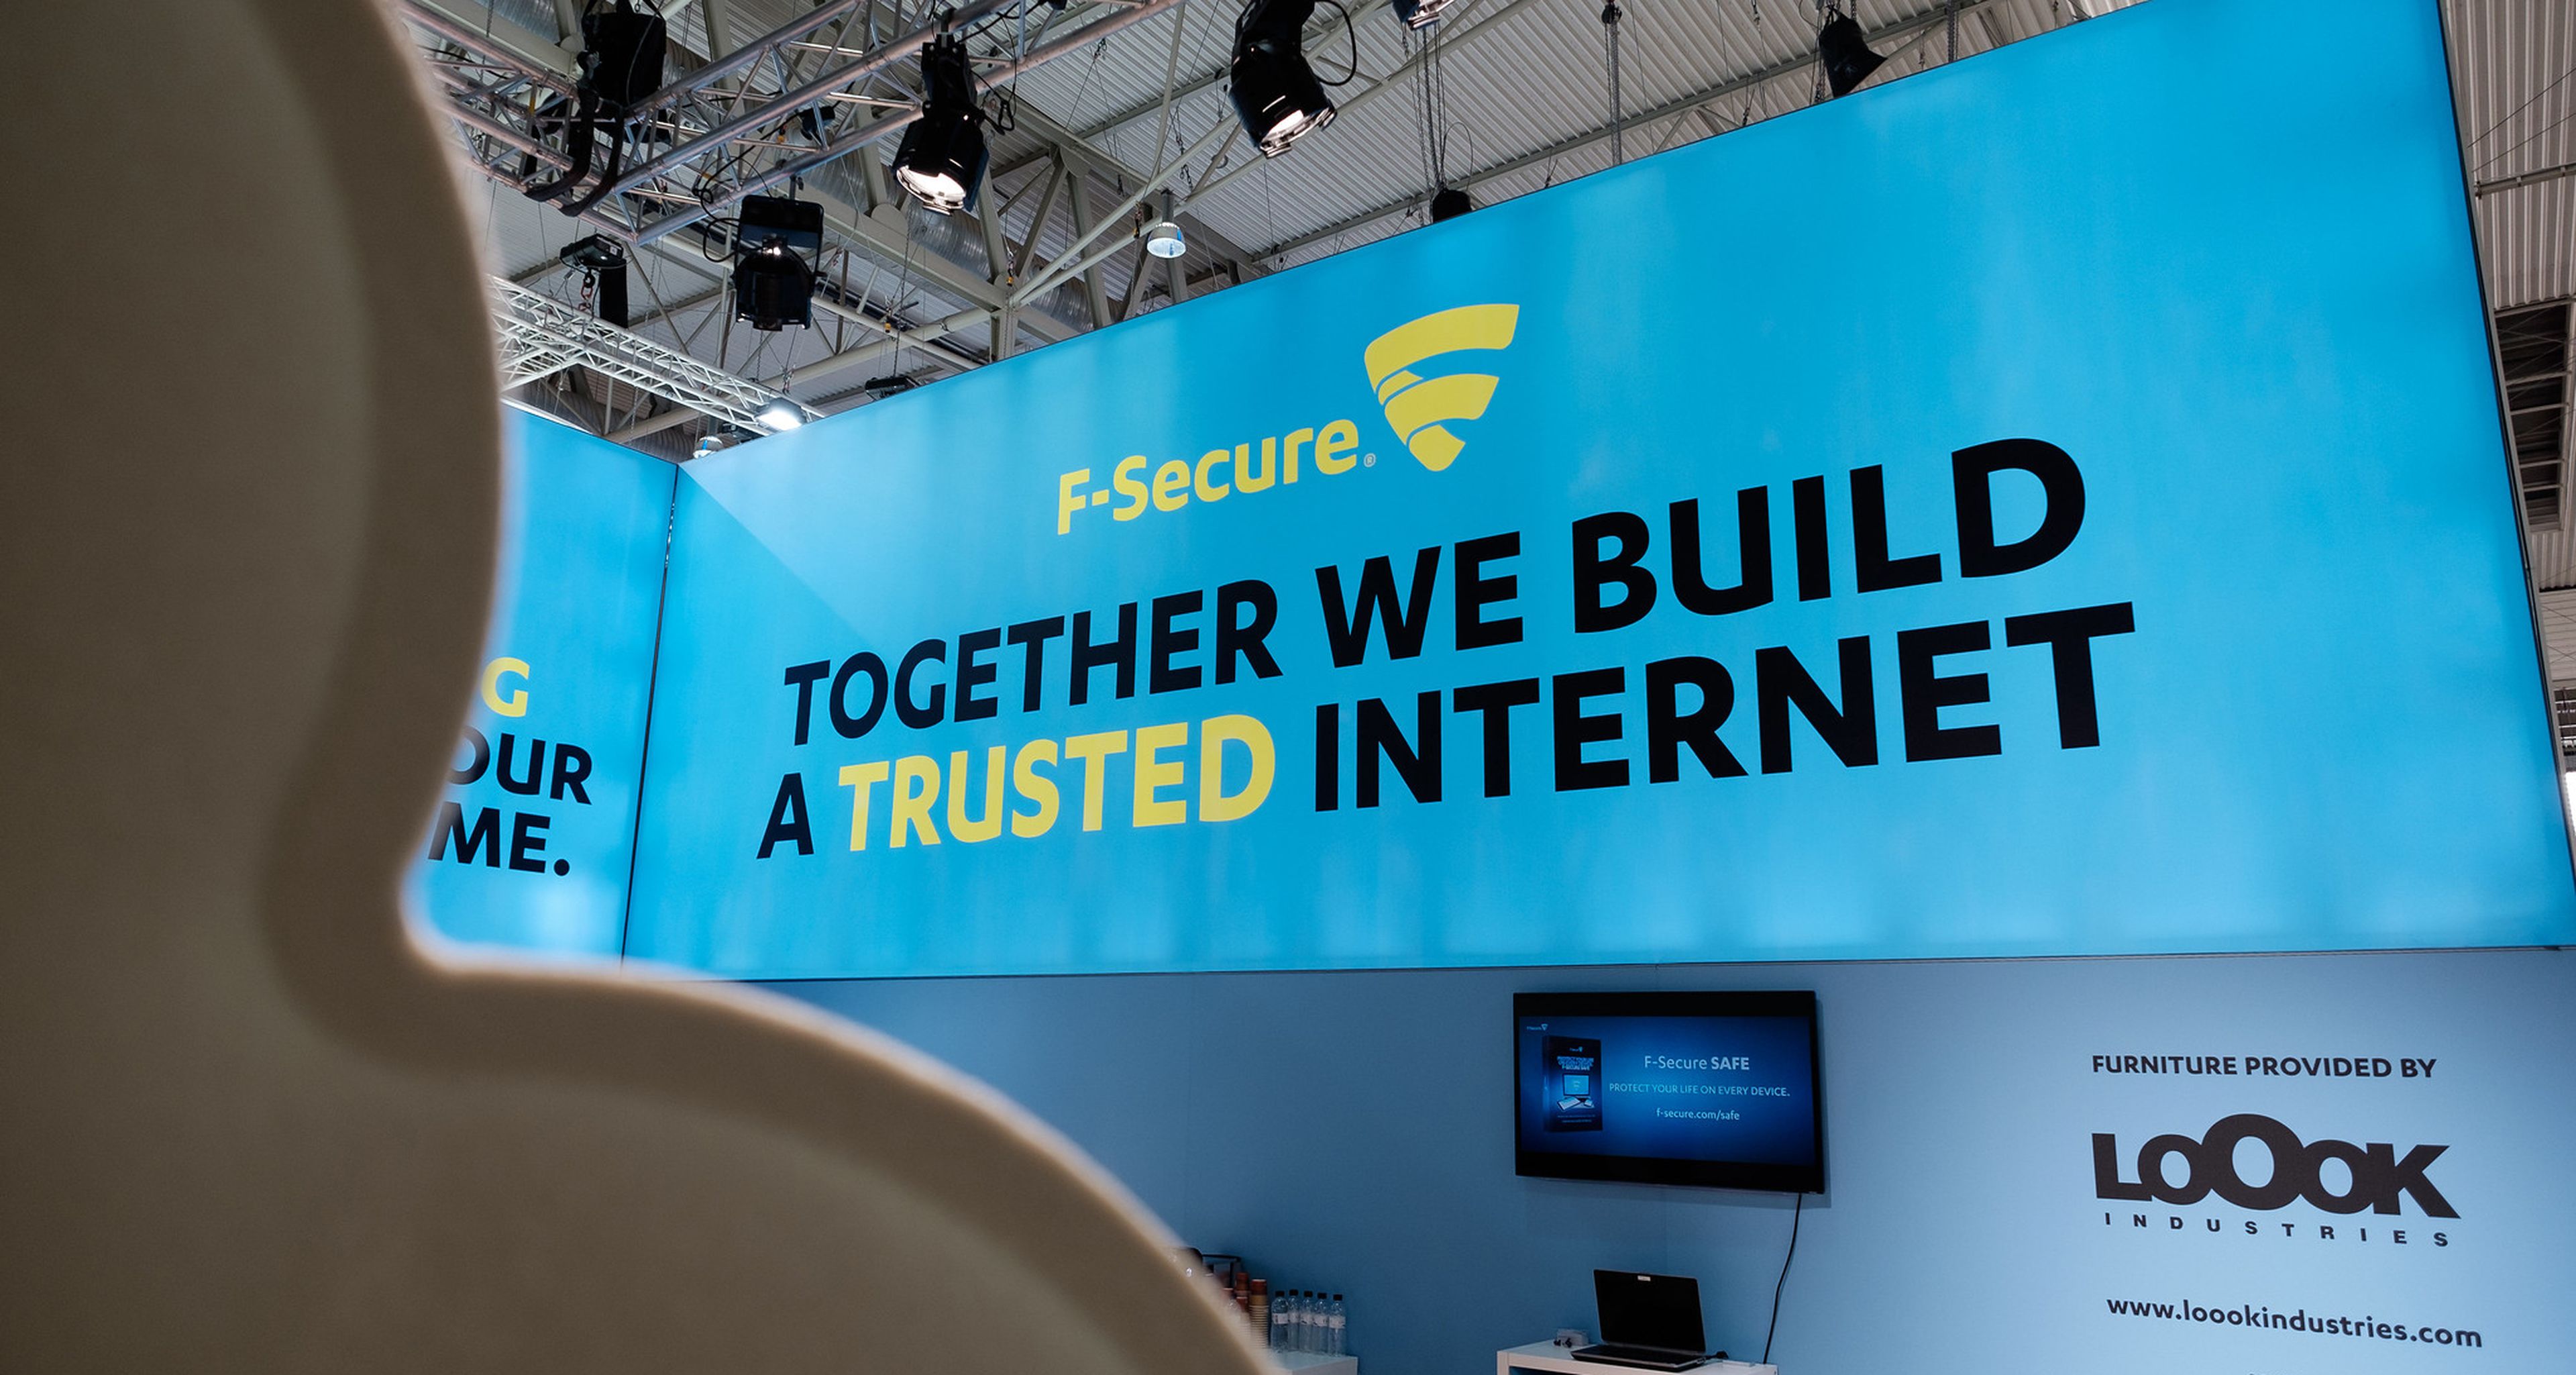 F-Secure is spinning off its B2B operations into a new company known as WithSecure. (&#8220;F-secure &#8211; Mobile World Congress 2016&#8221; by Janitors is marked with CC BY 2.0.)